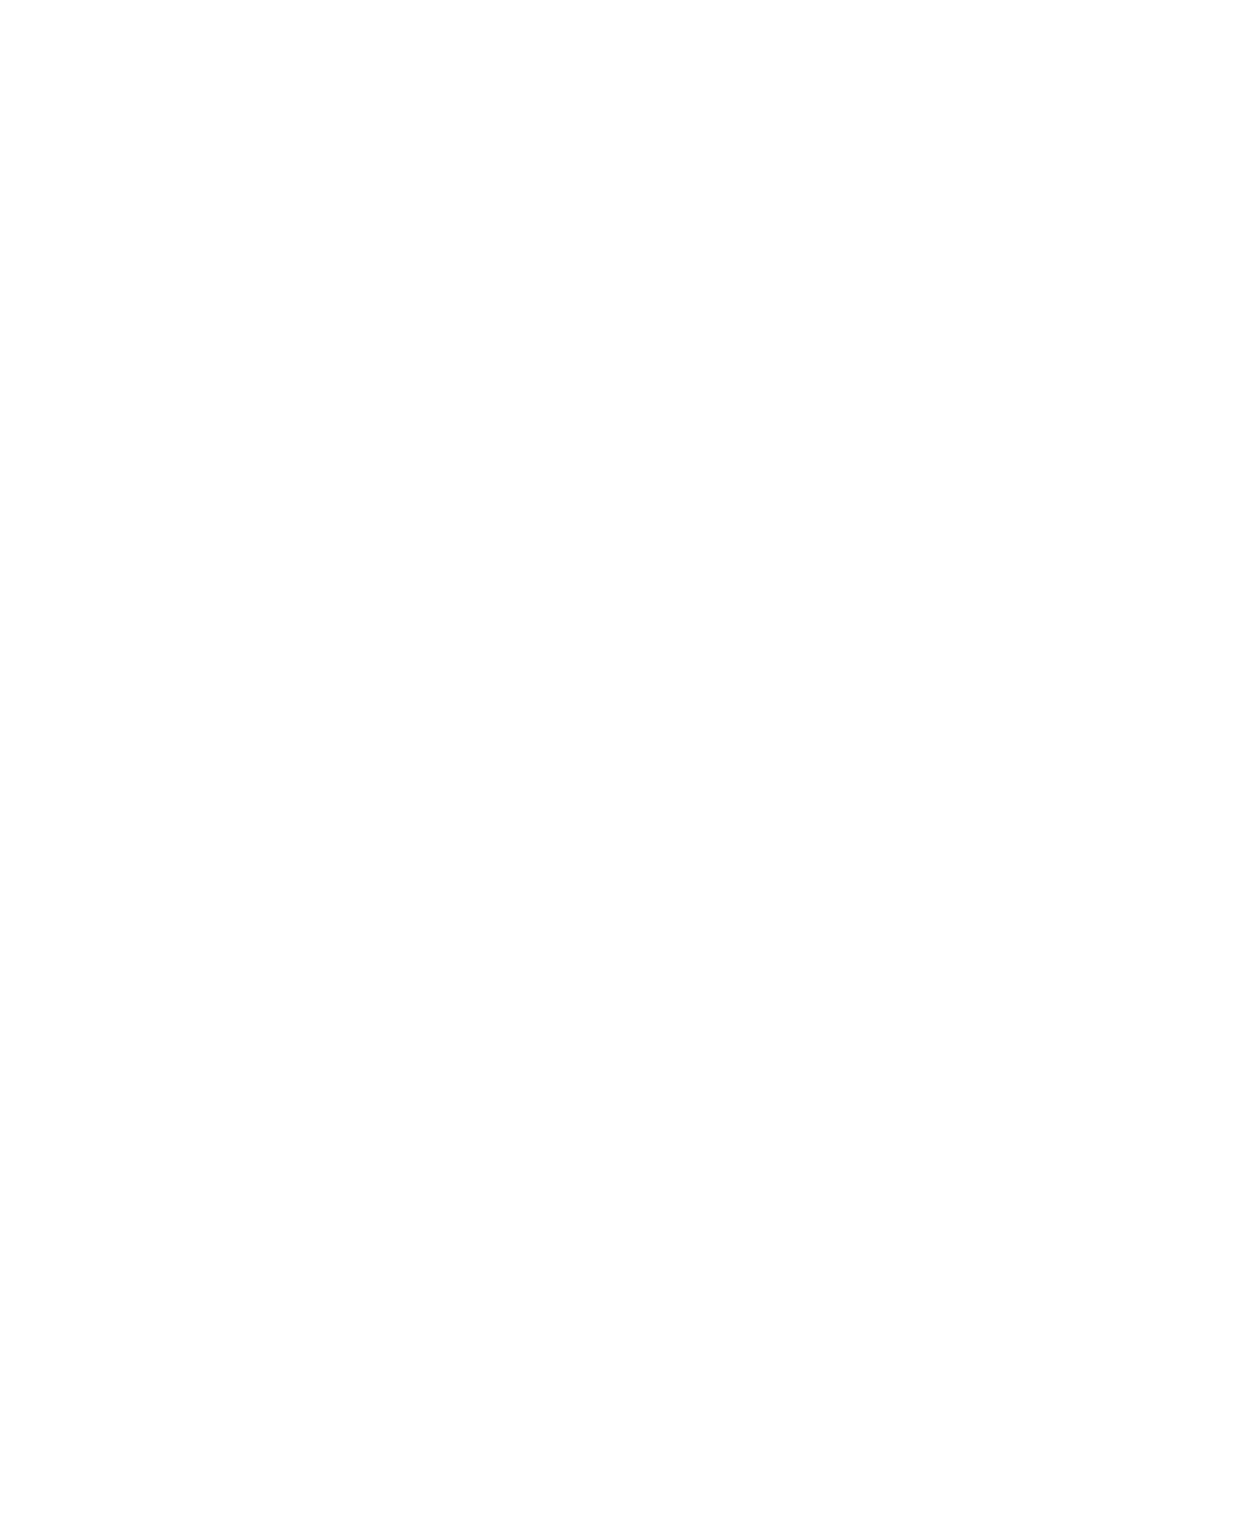 Evercore logo for dark backgrounds (transparent PNG)